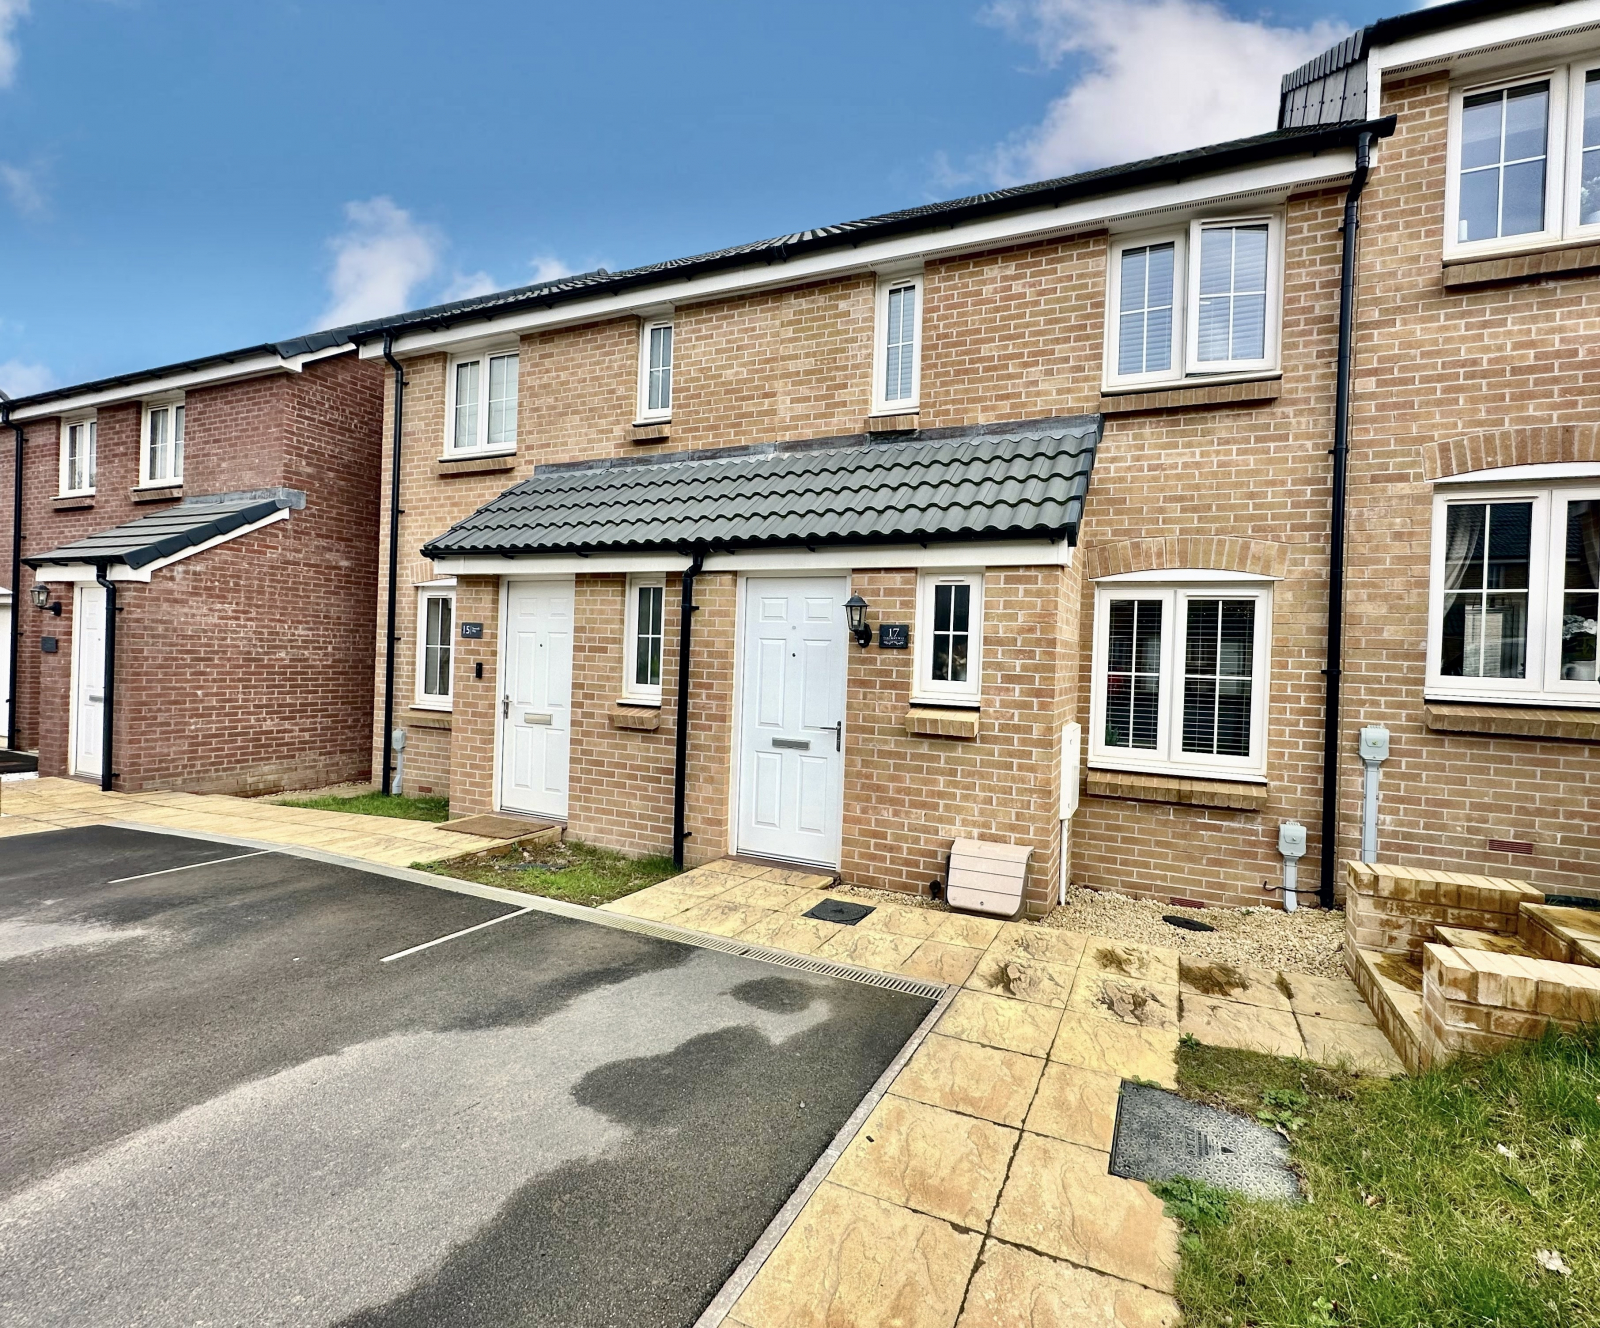 2 bed terraced house for sale in Tawcroft Way, Devon - Property Image 1